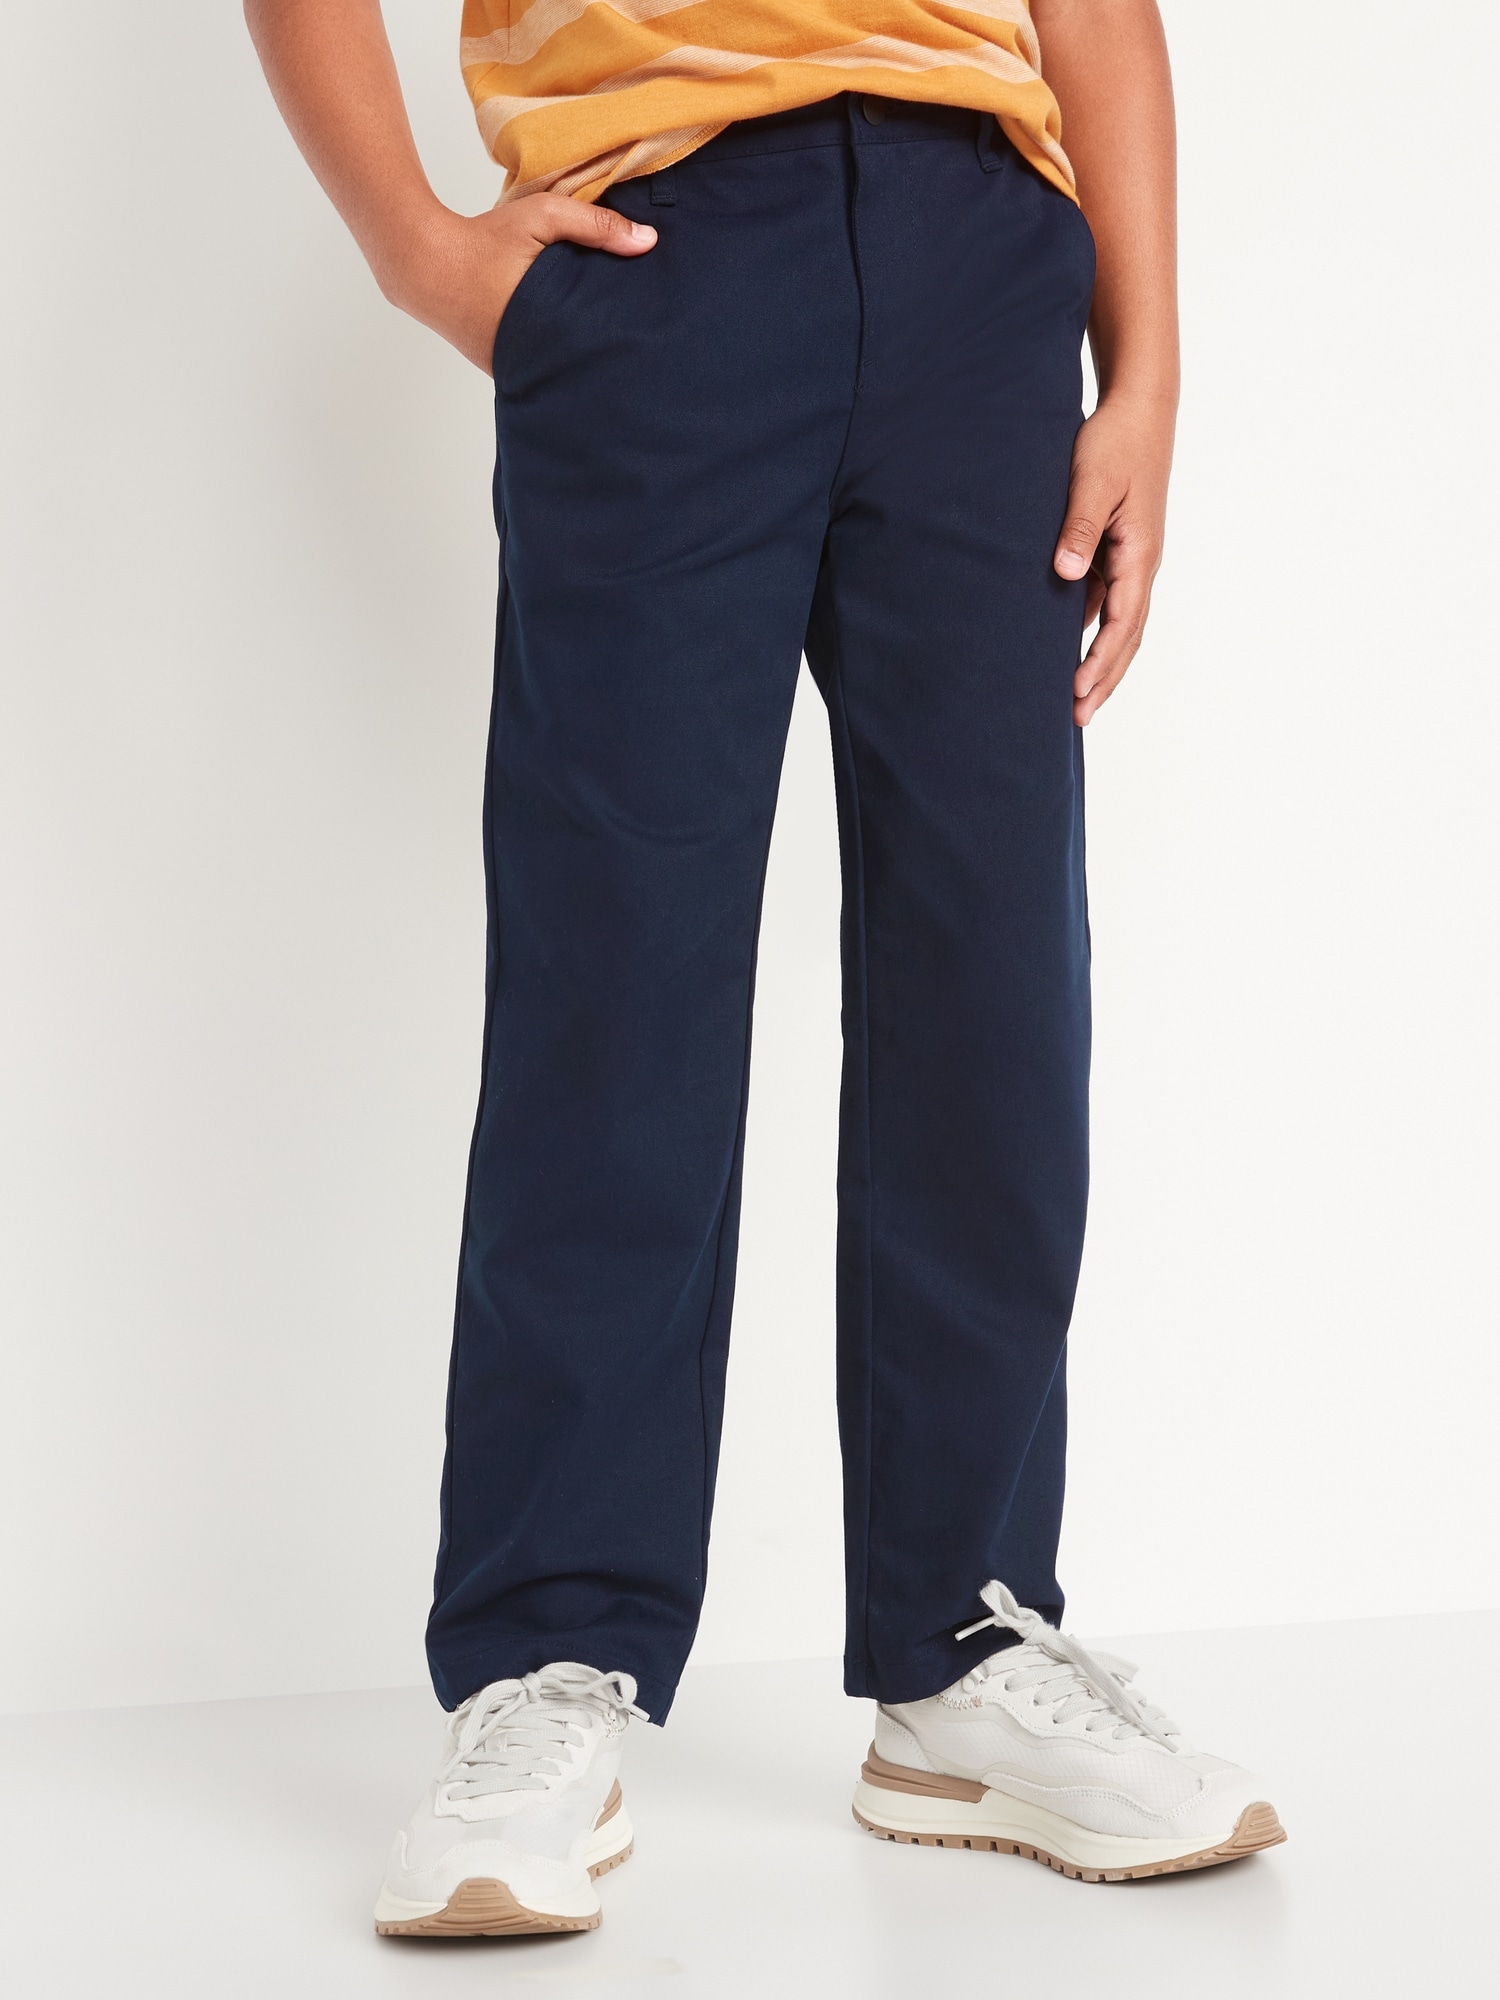 Pants: 90s -DSCP by Tennessee Apparel Corp- Mens navy blue solid colored  polyester wool blend flat front US Navy uniform pants with cuffless hem,  vertical seam inset side entry front pockets, one